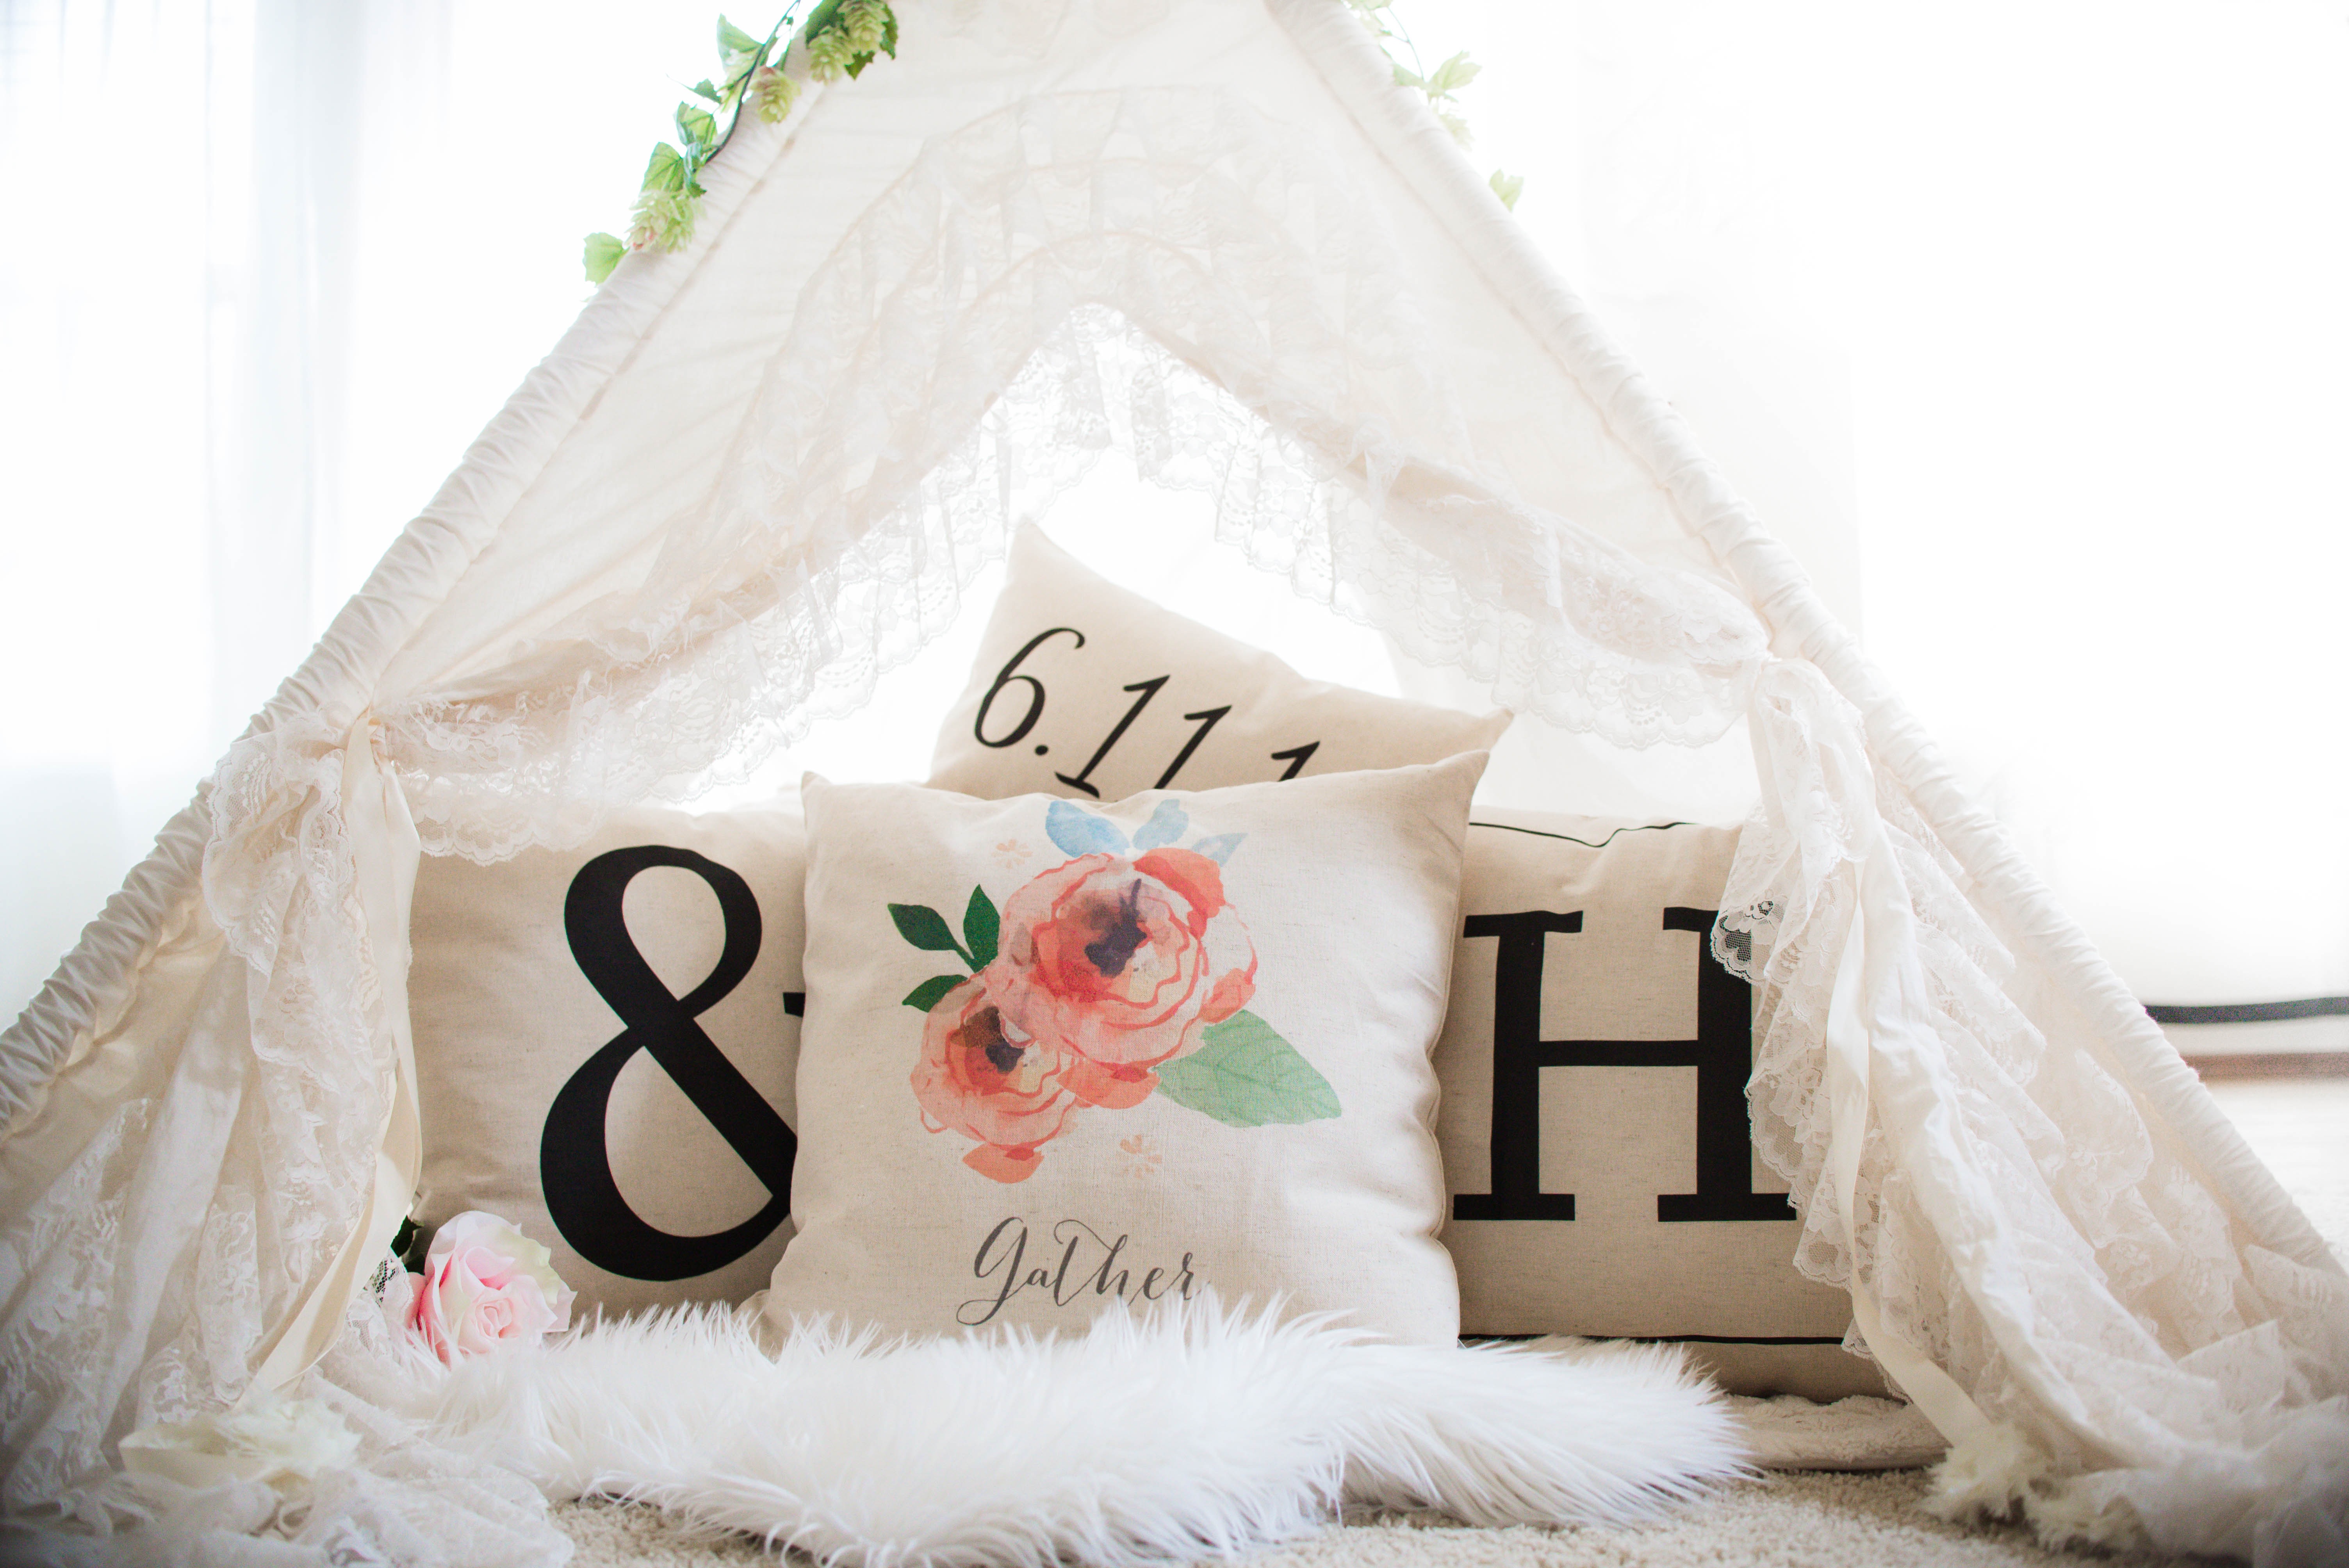 Hand-crafted home decor from So Vintage Chic + a giveaway!